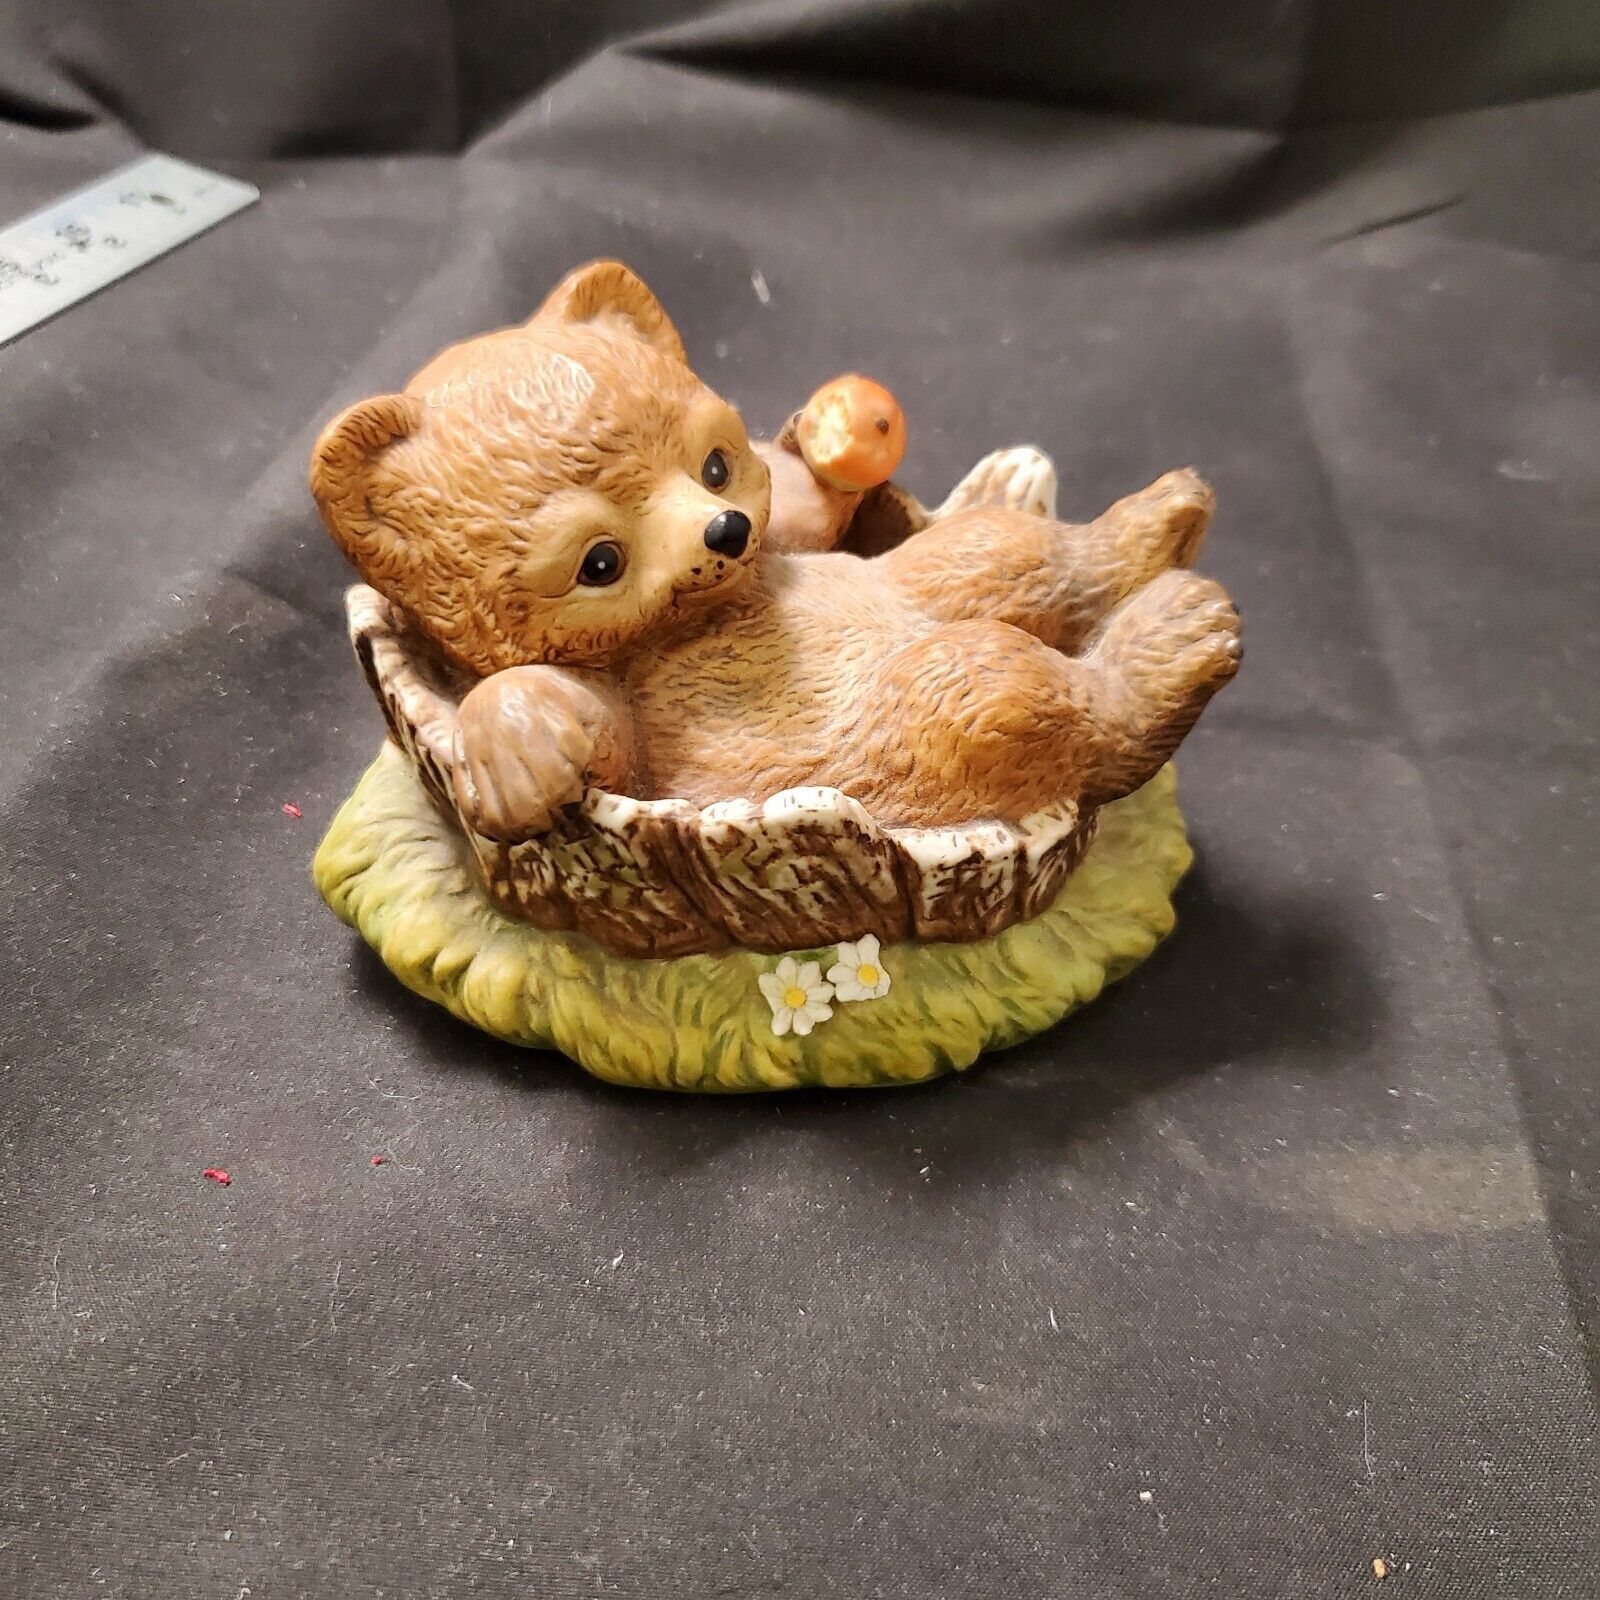 Vintage 1986 Masterpiece Porcelain by HOMCO " Little Bear Cup In A Tub" - $9.98